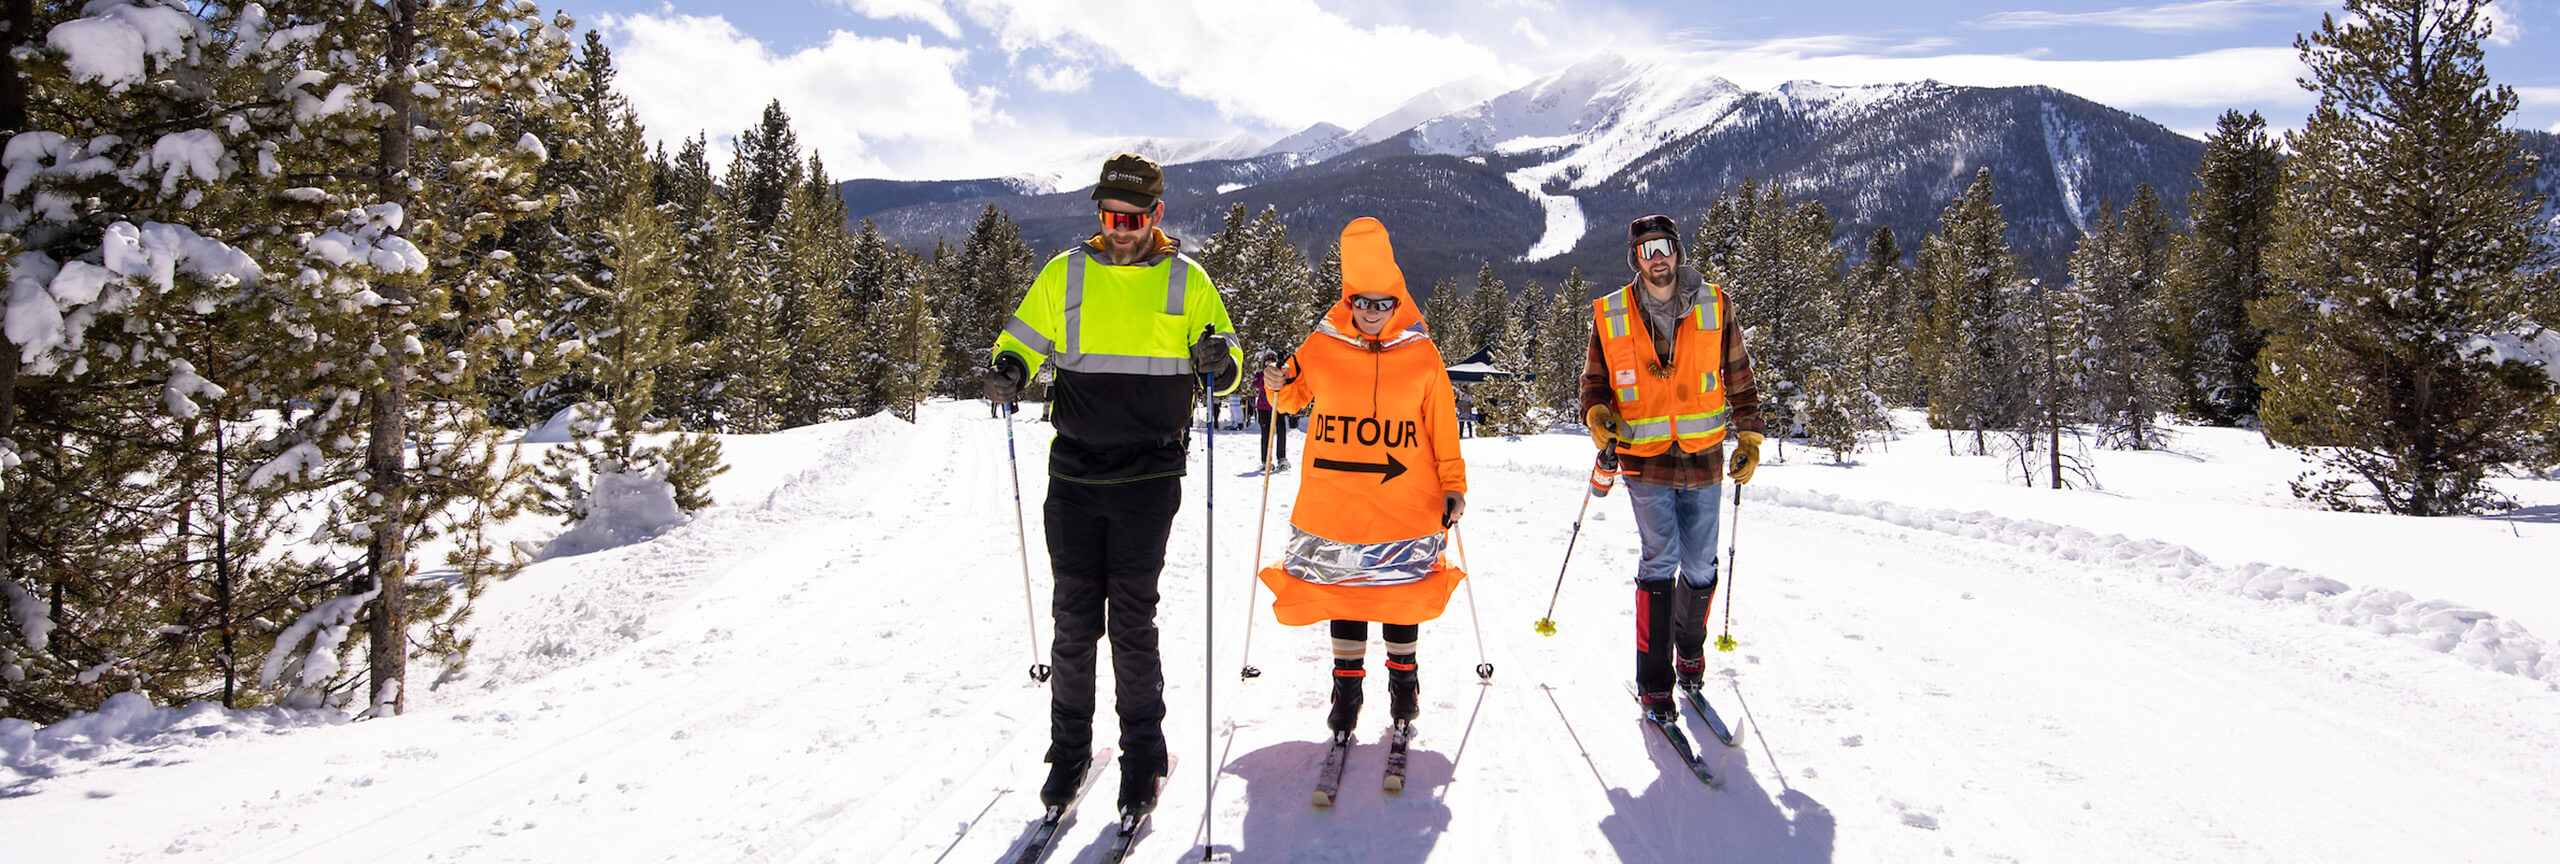 BrewSki costumed participants on the Nordic Trails with Peak One in the background